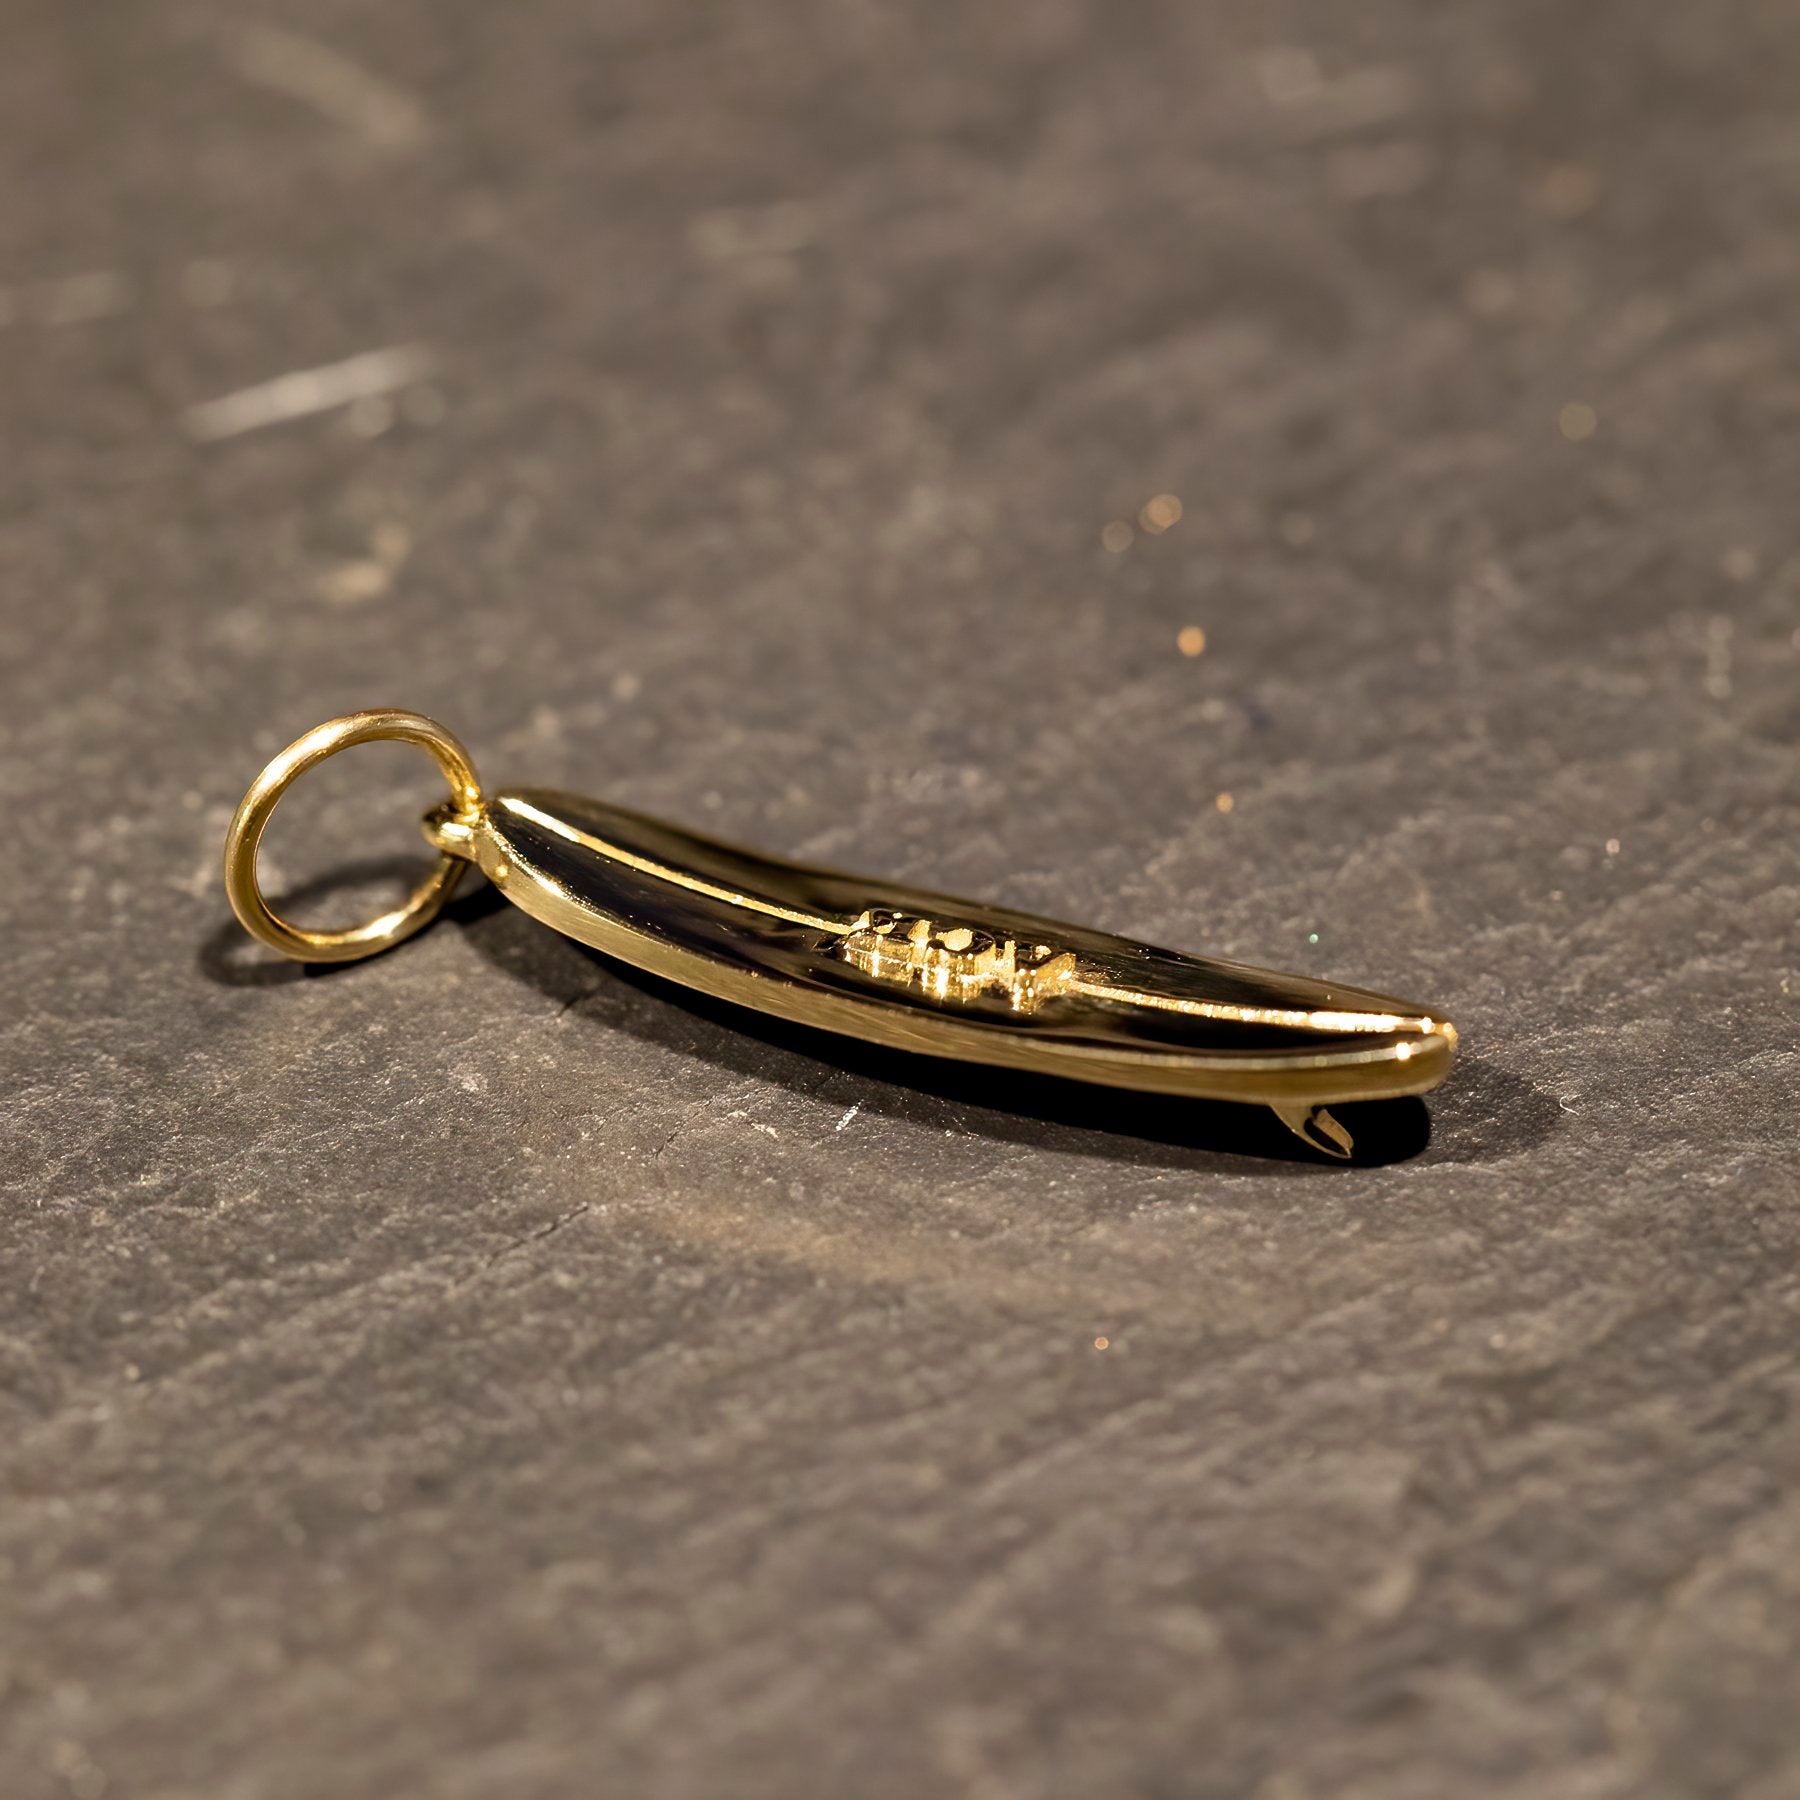 14K Yellow Gold "ACK" Surfboard Charm handmade by Jewel in the Sea Nantucket